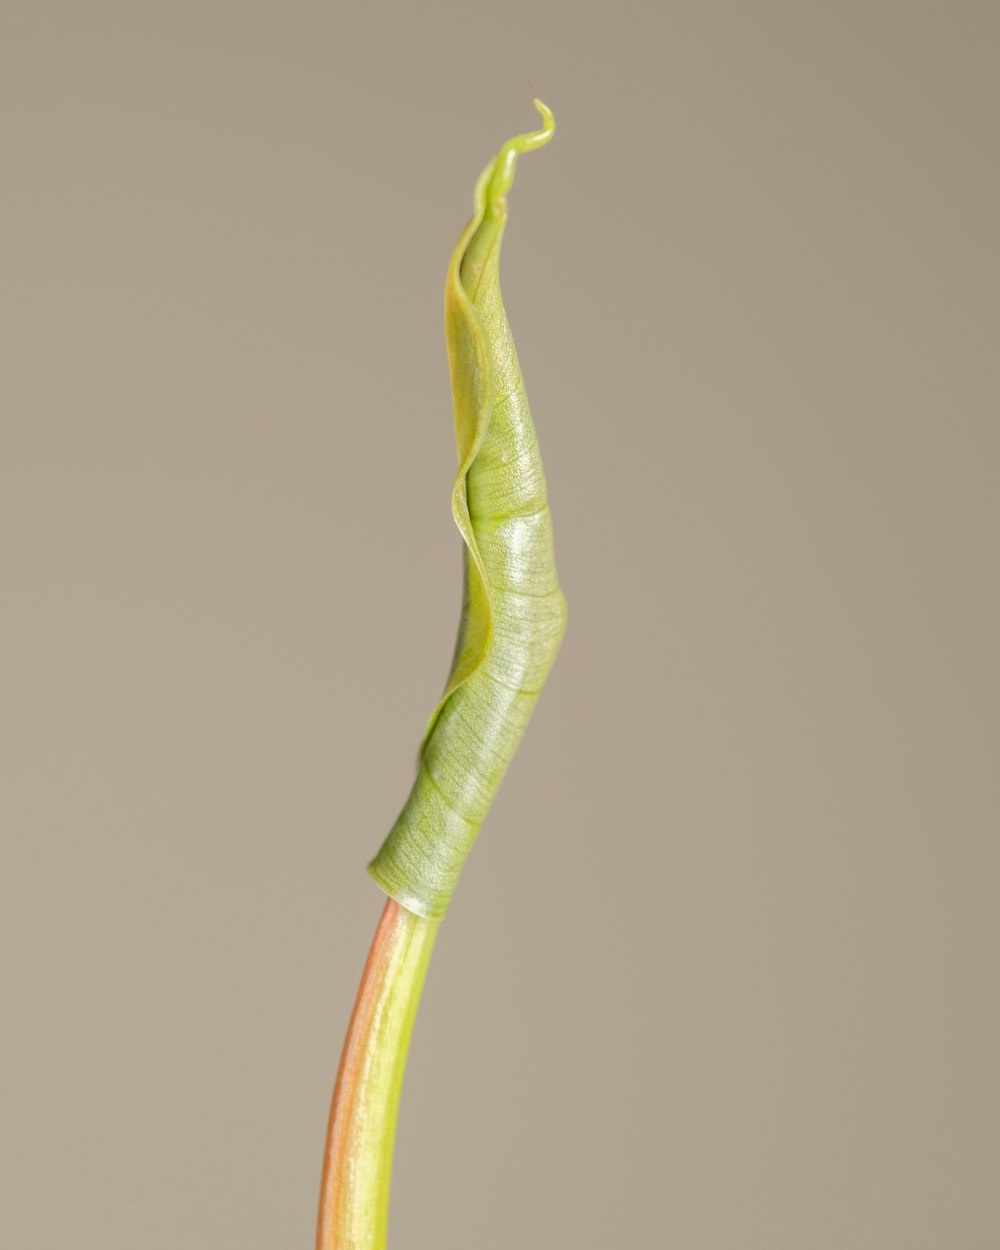 a green plant with a long stem with a yellow end